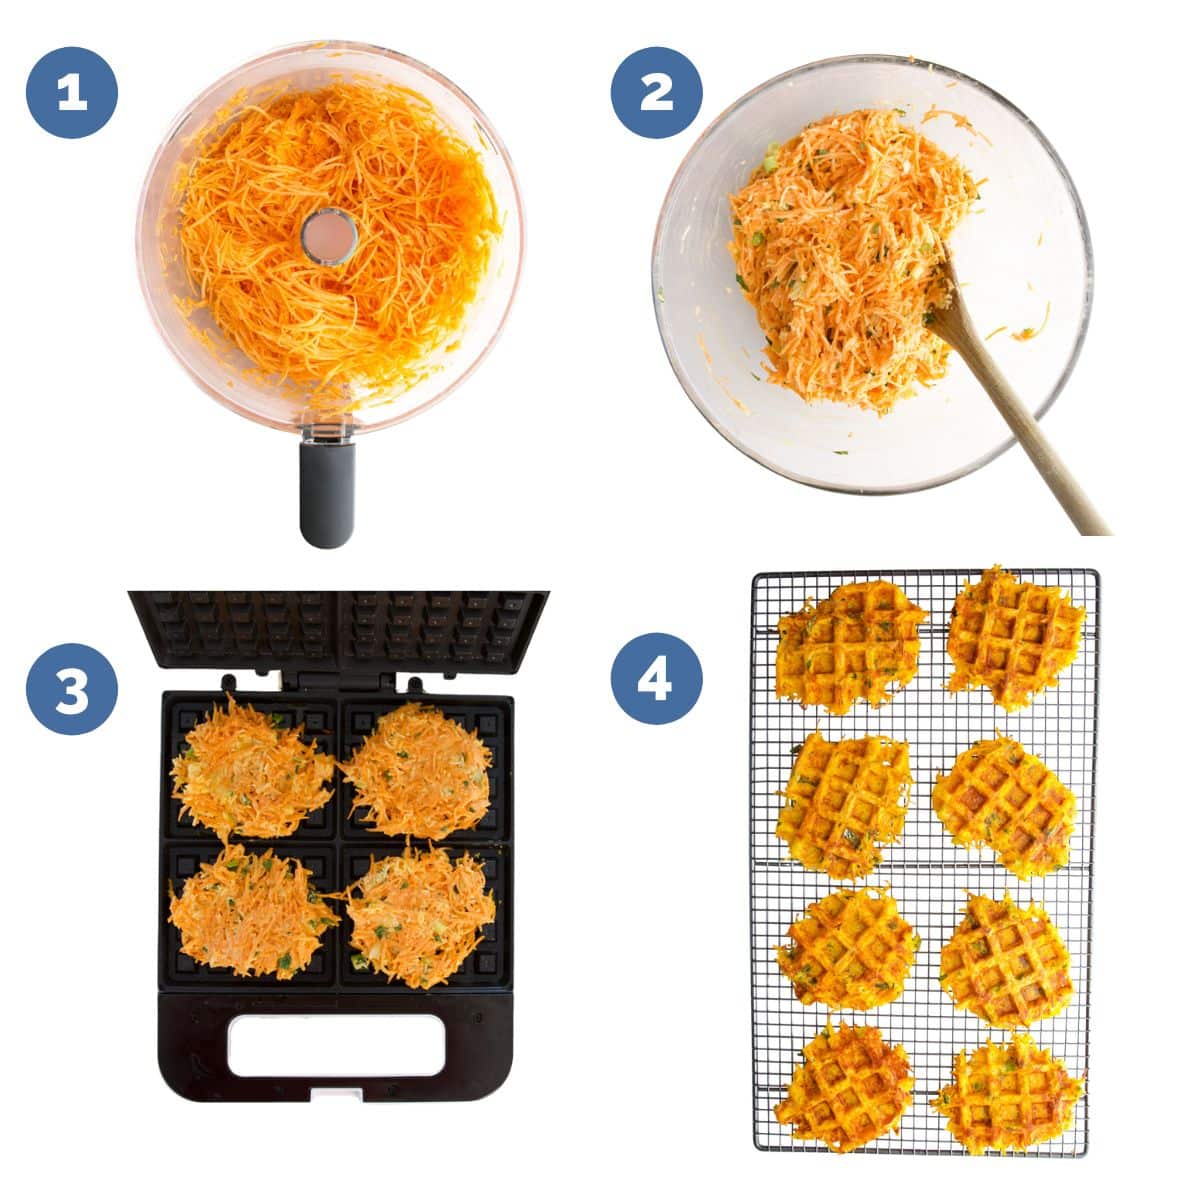 Collage of 4 Images Showing How to Make Savoury Waffles. 1 Grate Vegetables 2. Mix Ingredients in Bowl 3. Waffle Mixture in Waffle Iron 4. Cooked Waffles on Wire Rack.